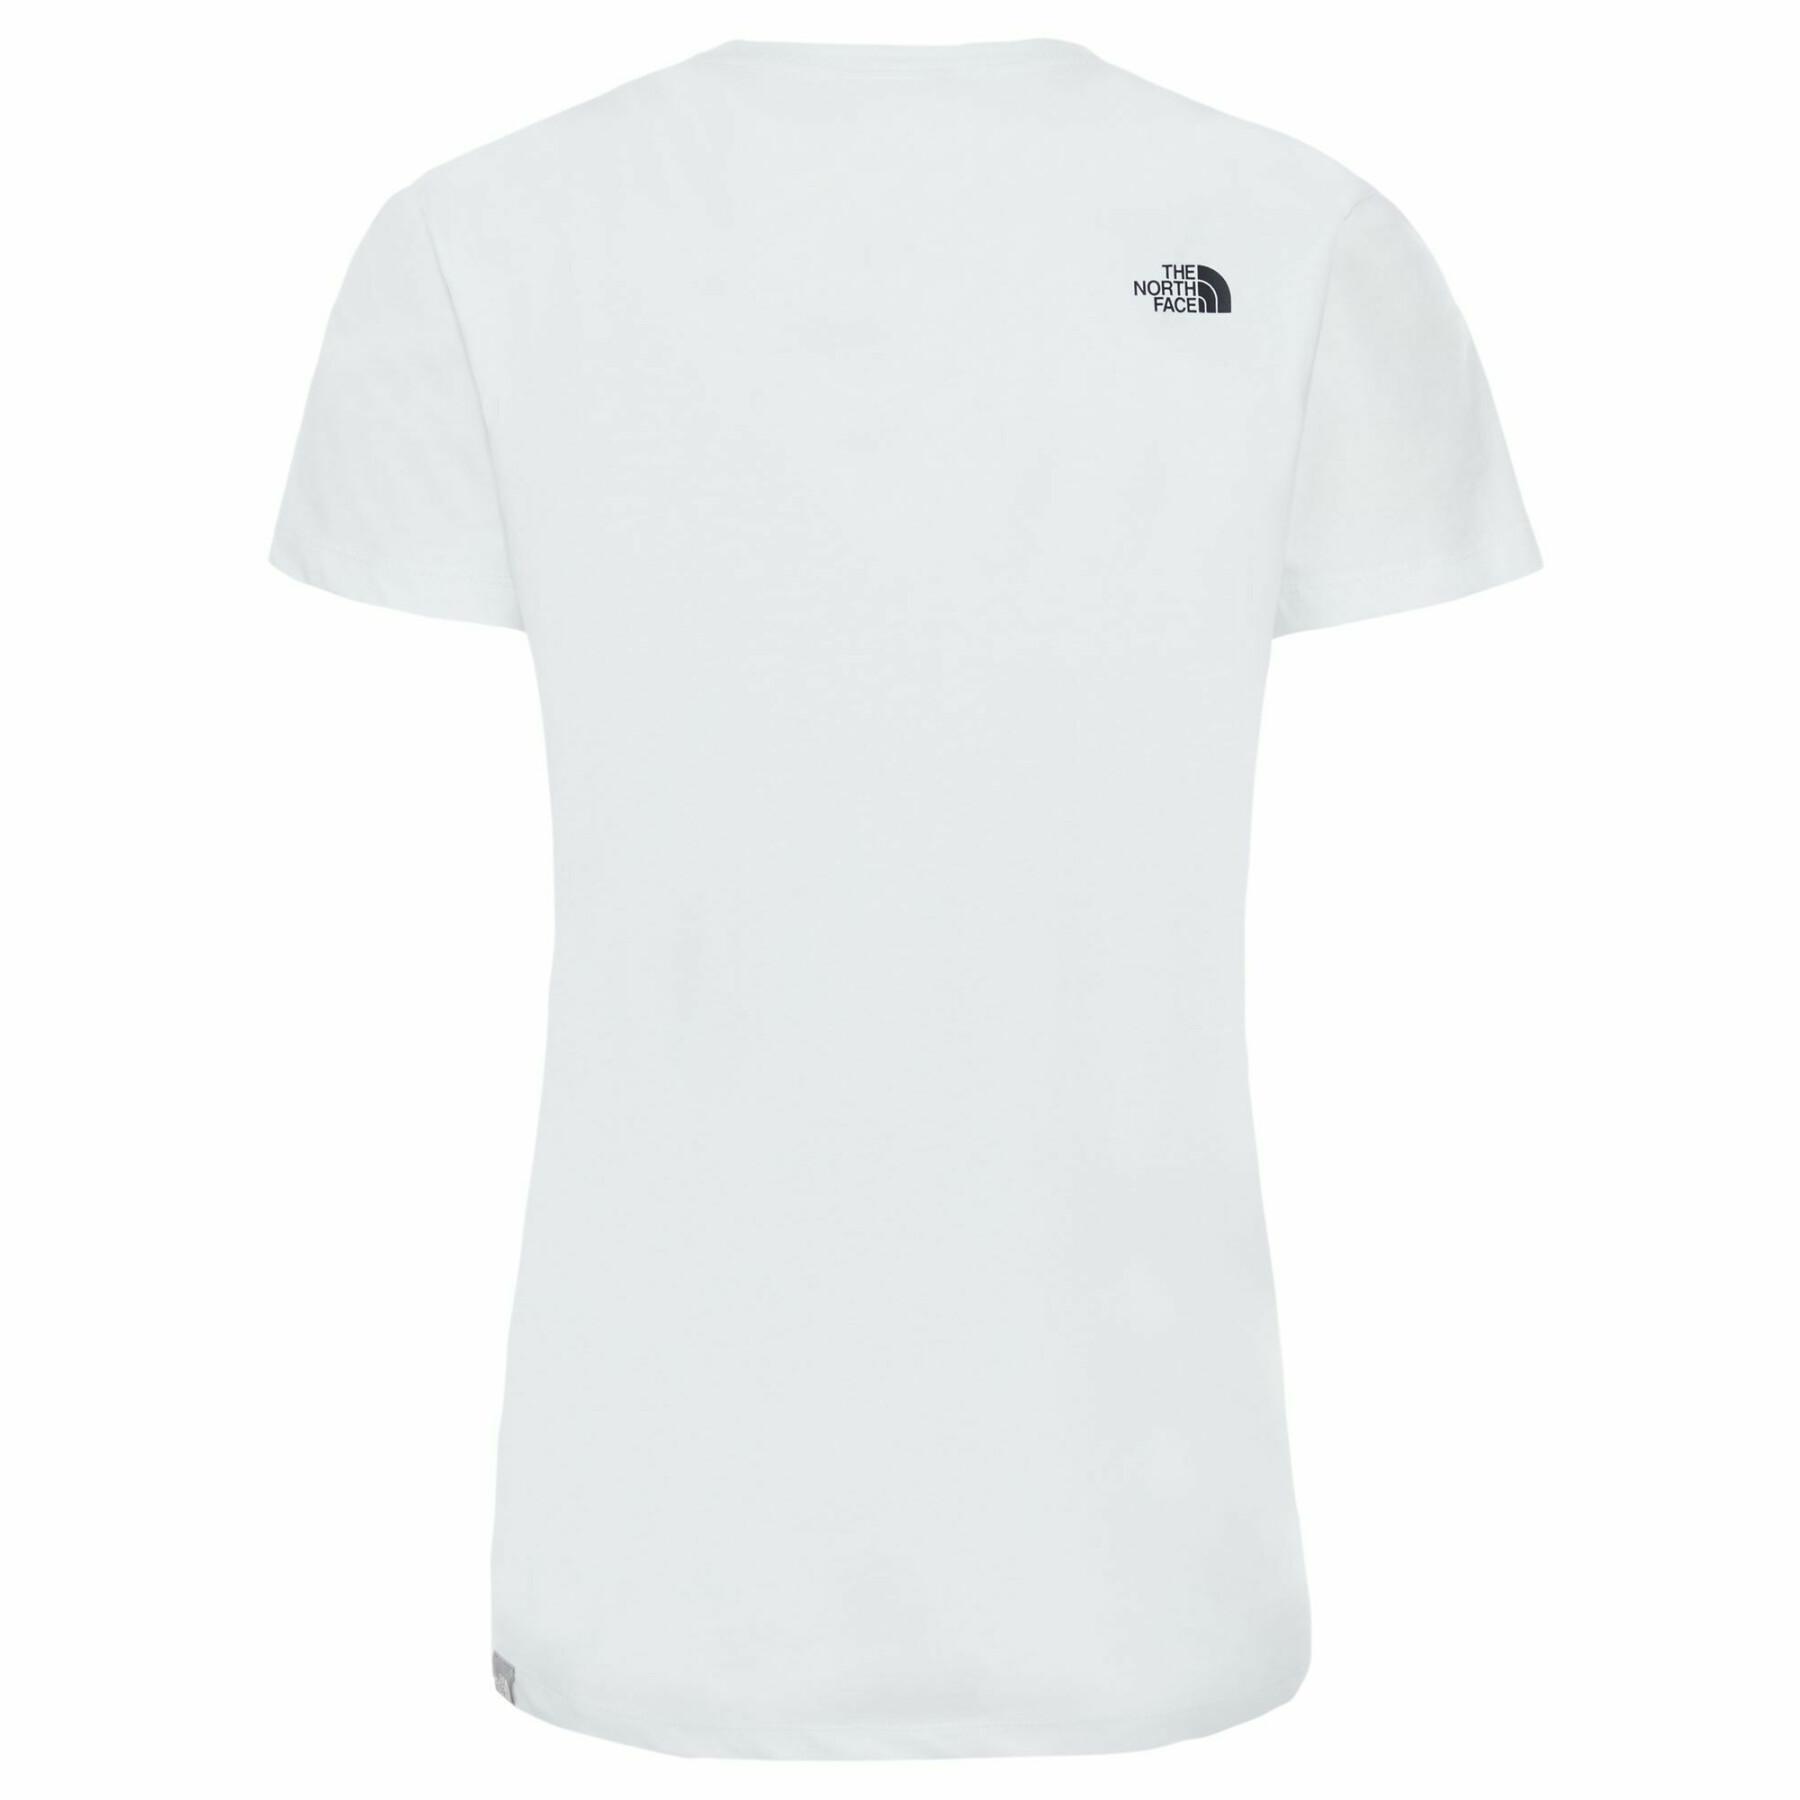 Vrouwen-T-shirt The North Face Easy